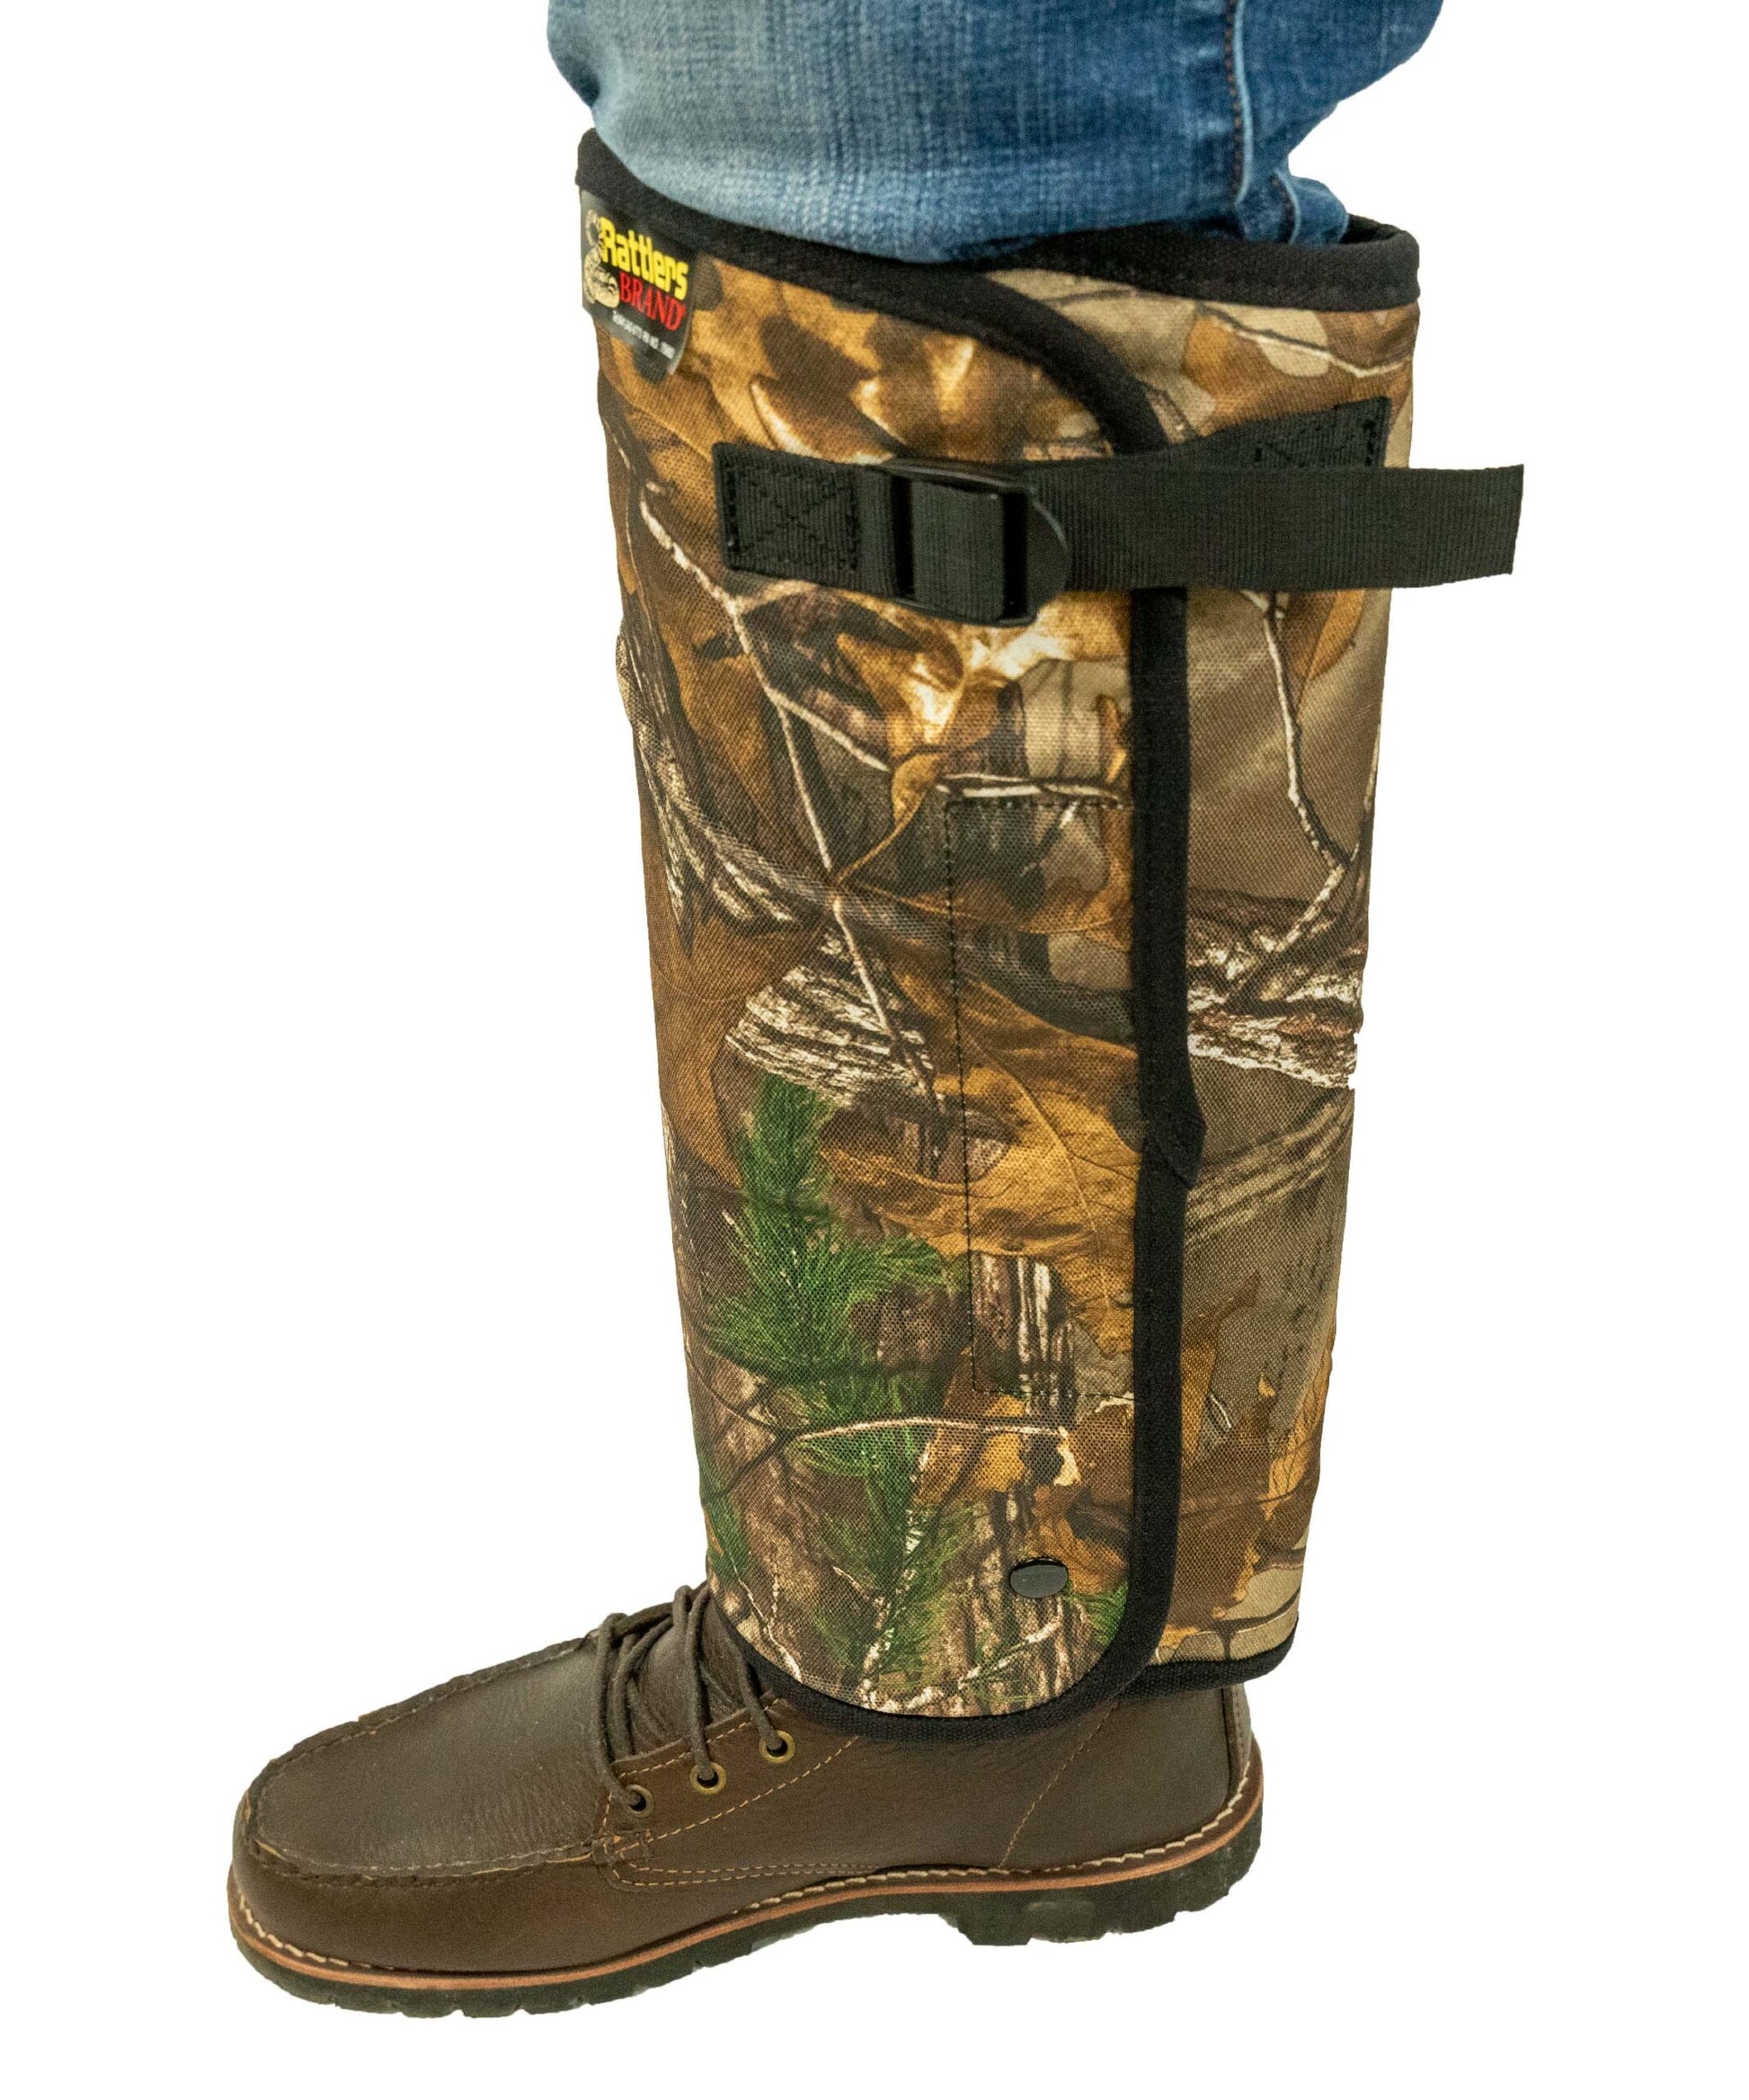 Rattlers Snake Proof Gaiters – Boyt Harness